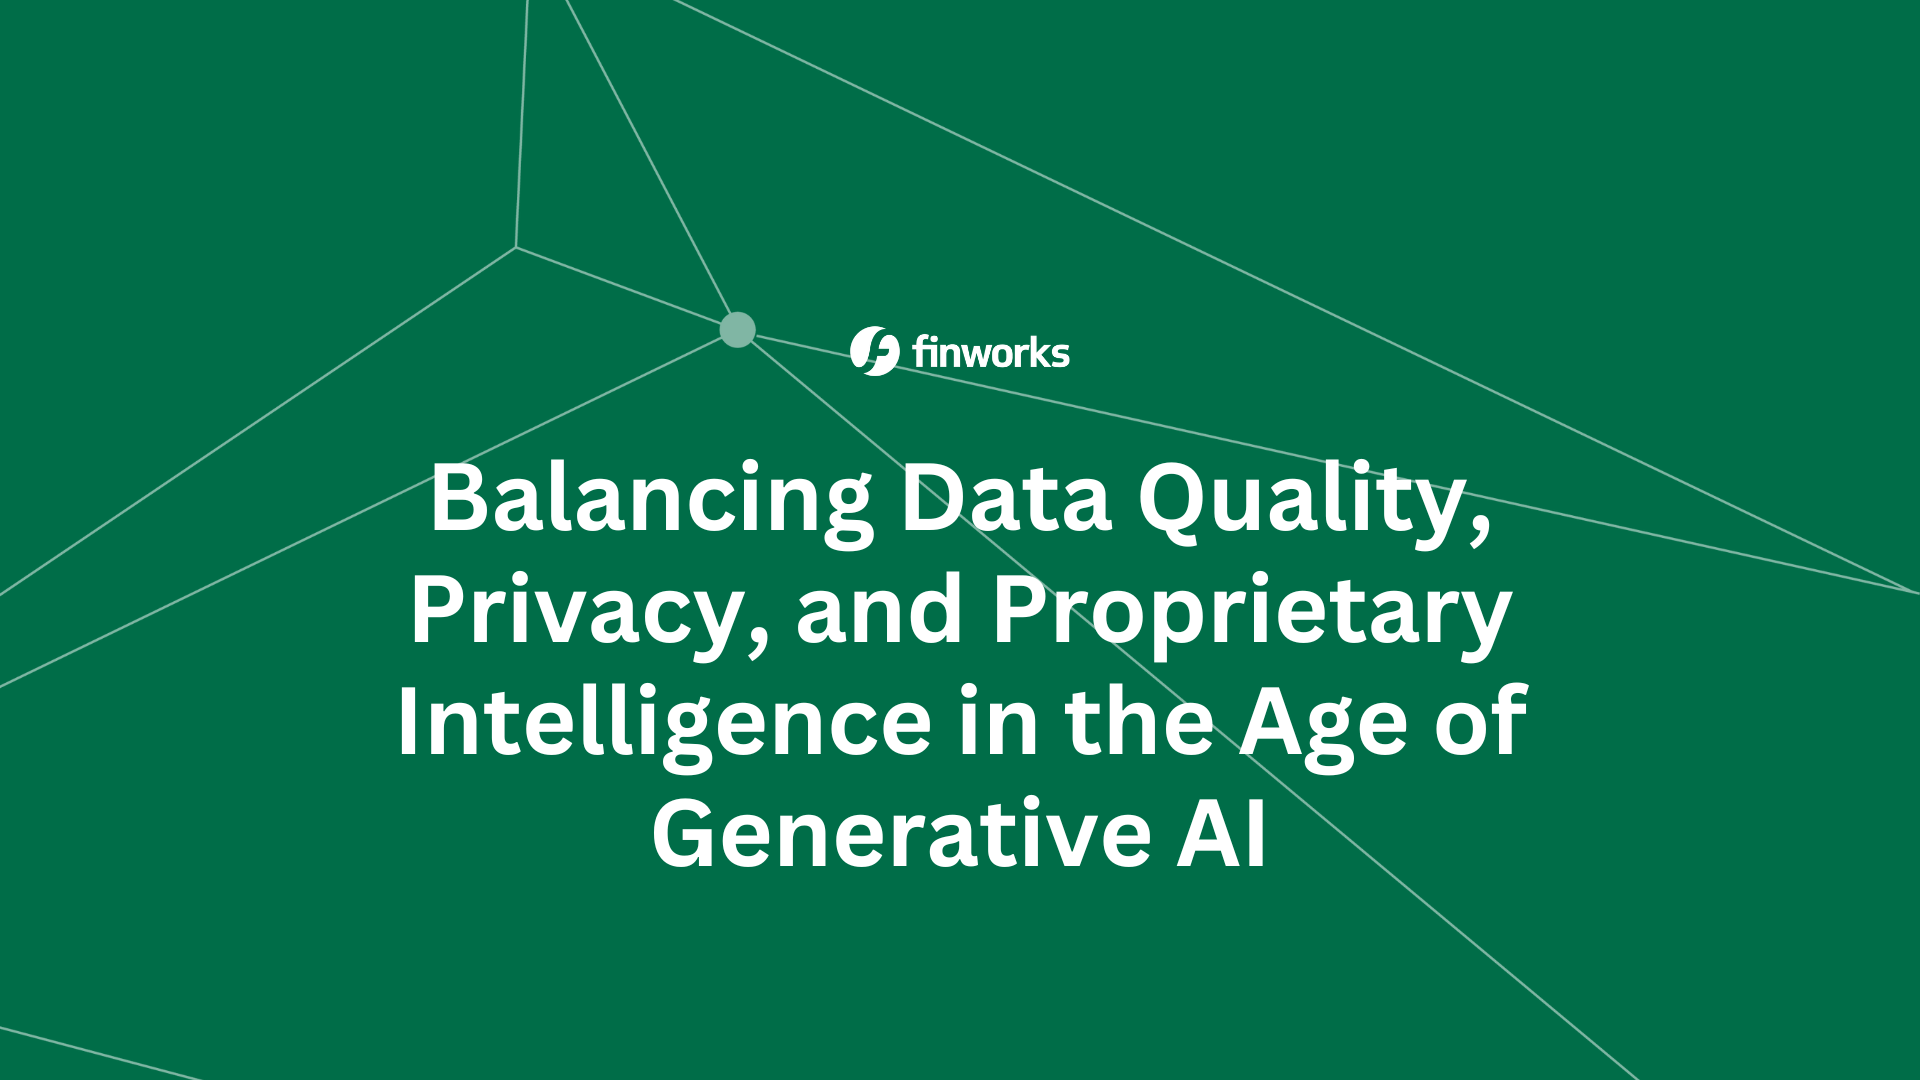 Balancing Data Quality, Privacy, and Proprietary Intelligence in the Age of Generative AI 